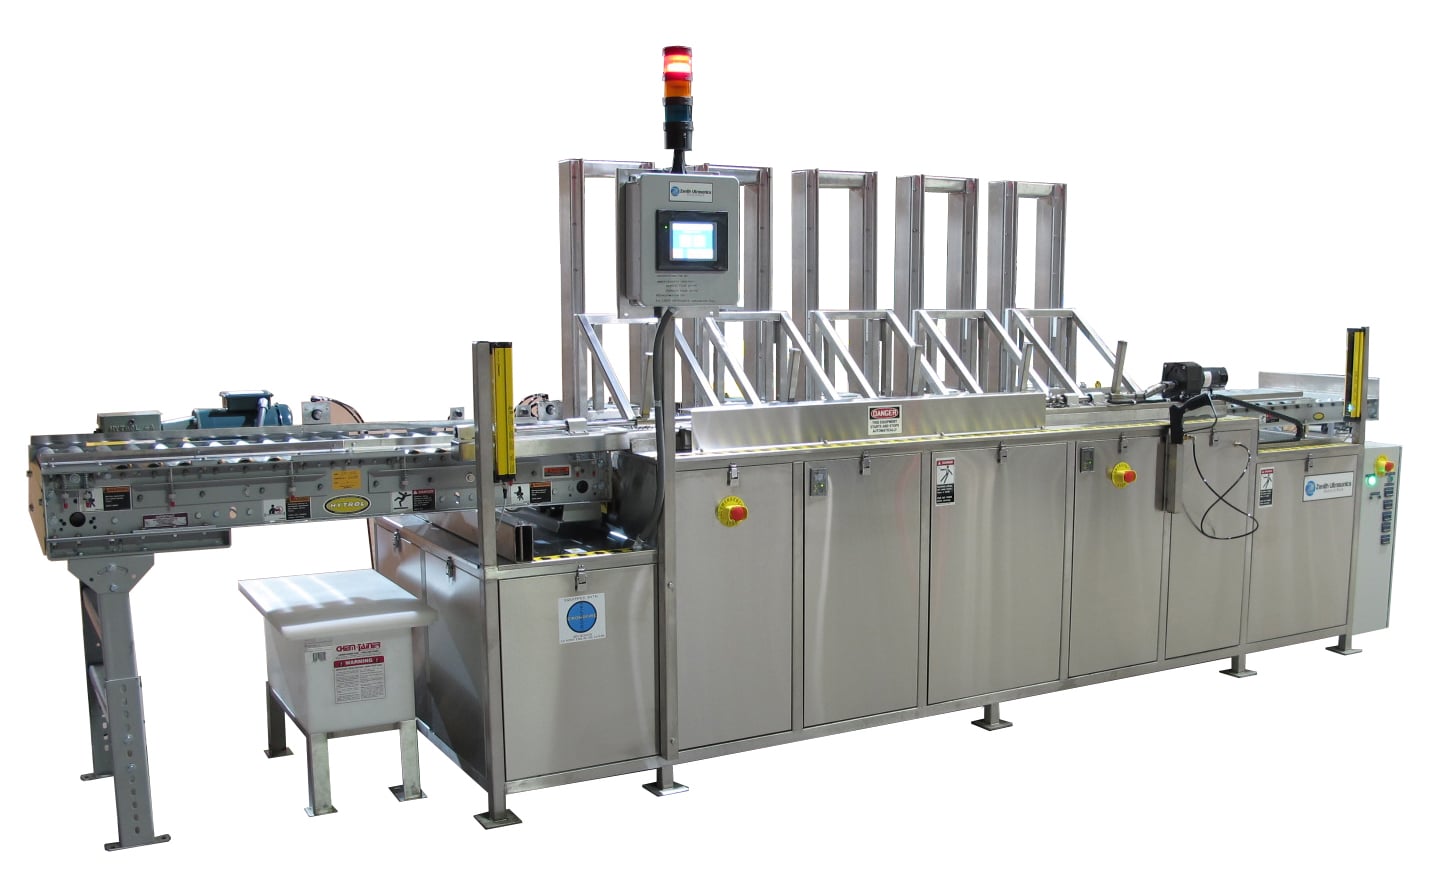 SS Industrial Ultrasonic Cleaning Machine, Capacity: 5 Per Day at